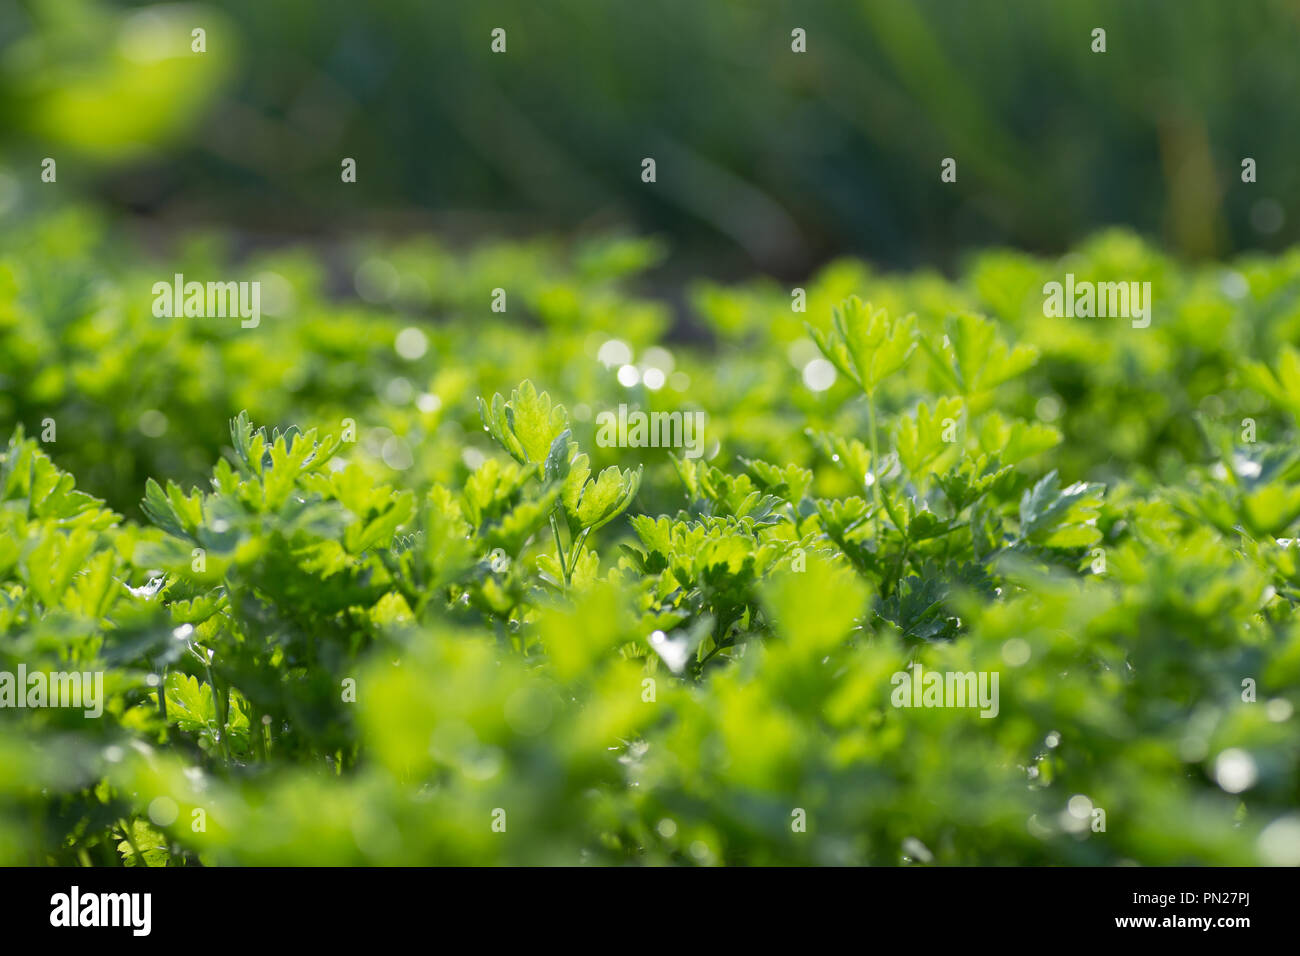 parsley salad dill close-up background Stock Photo